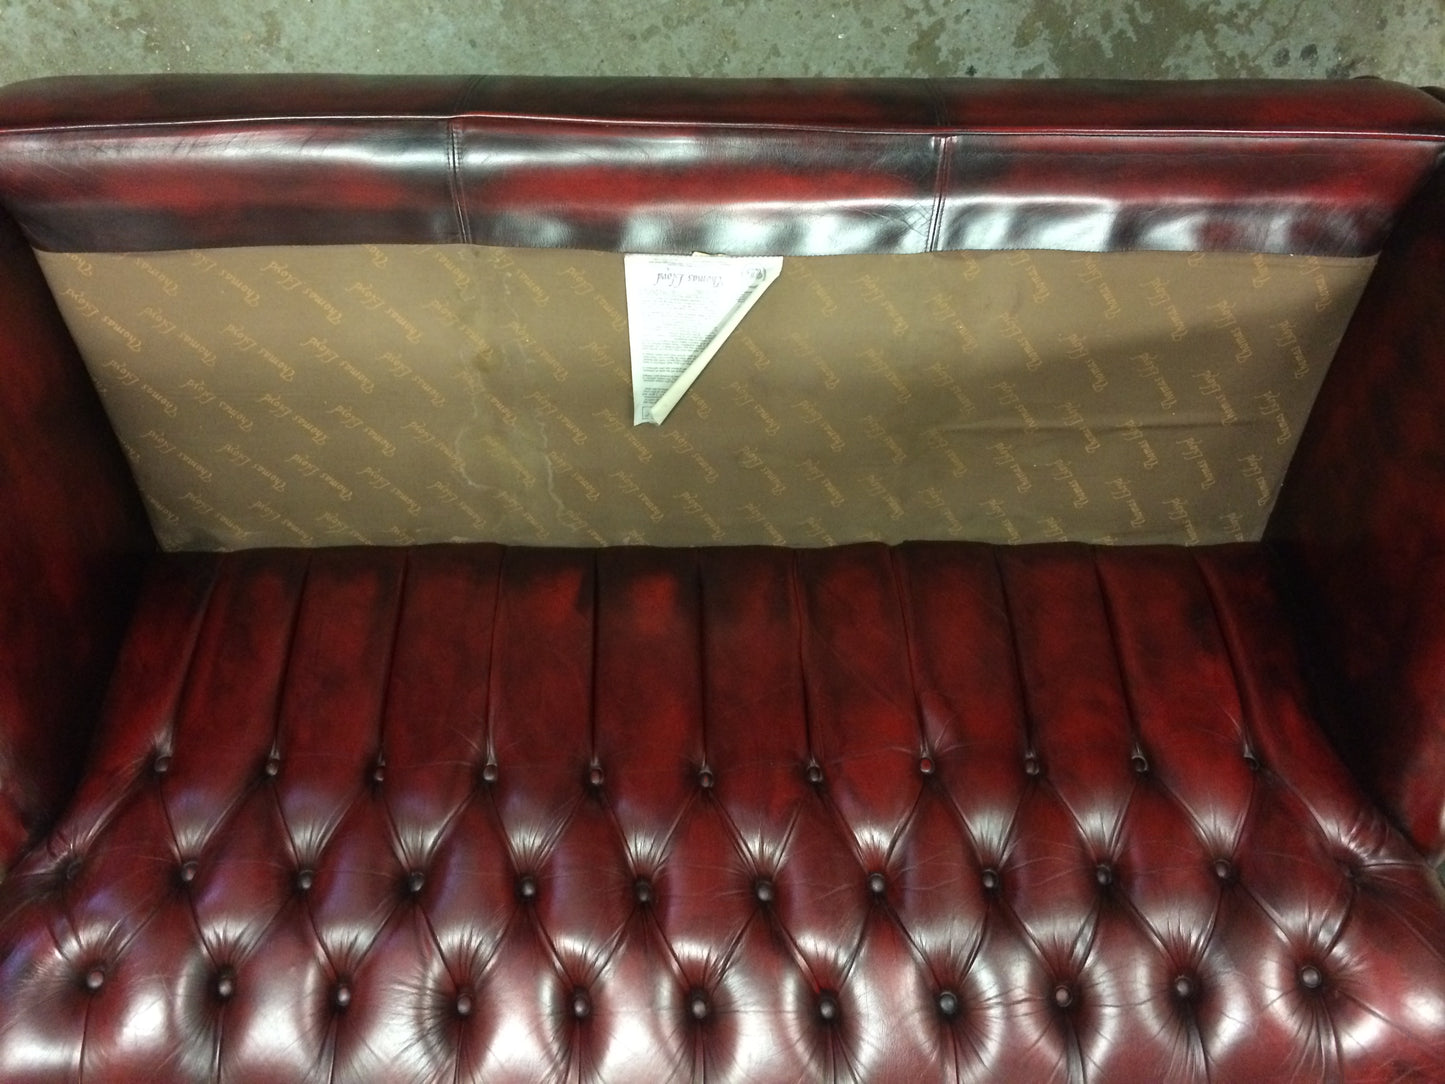 Quality 1980's Vintage Hand Dyed Oxblood Leather Chesterfield 3 seater Sofa